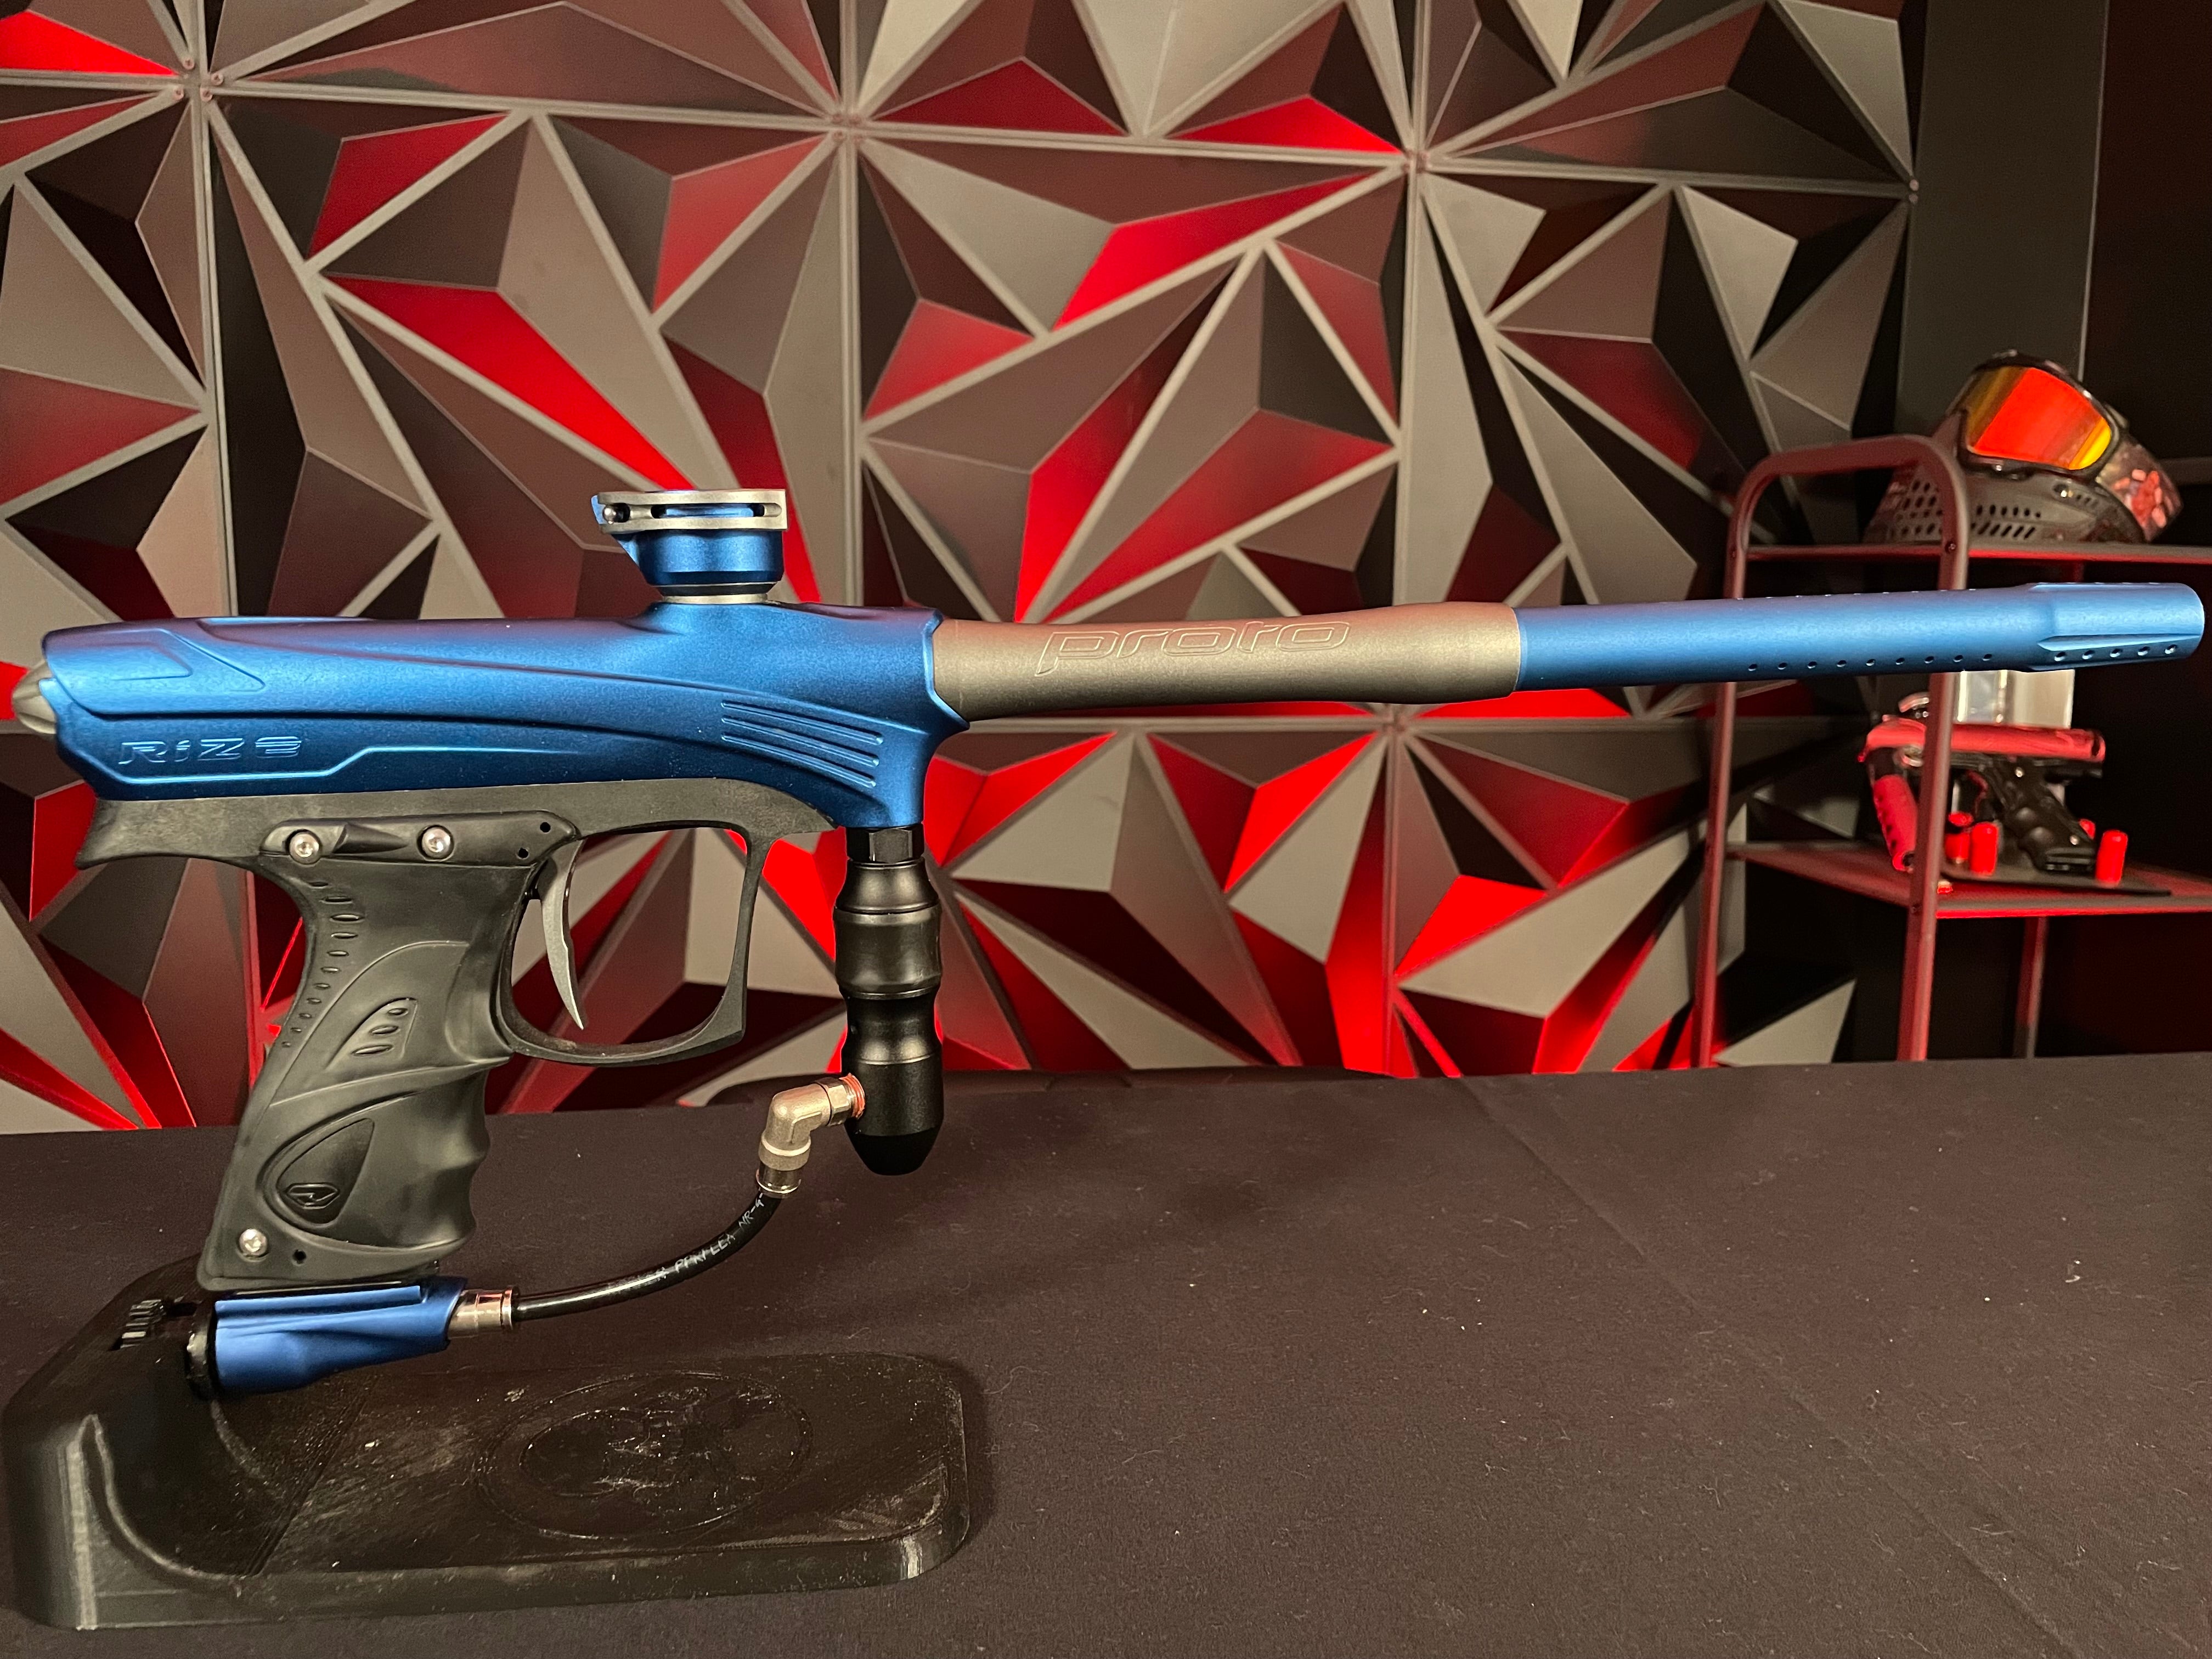 Used Dye Maxed Rize Paintball Gun - Blue/Pewter